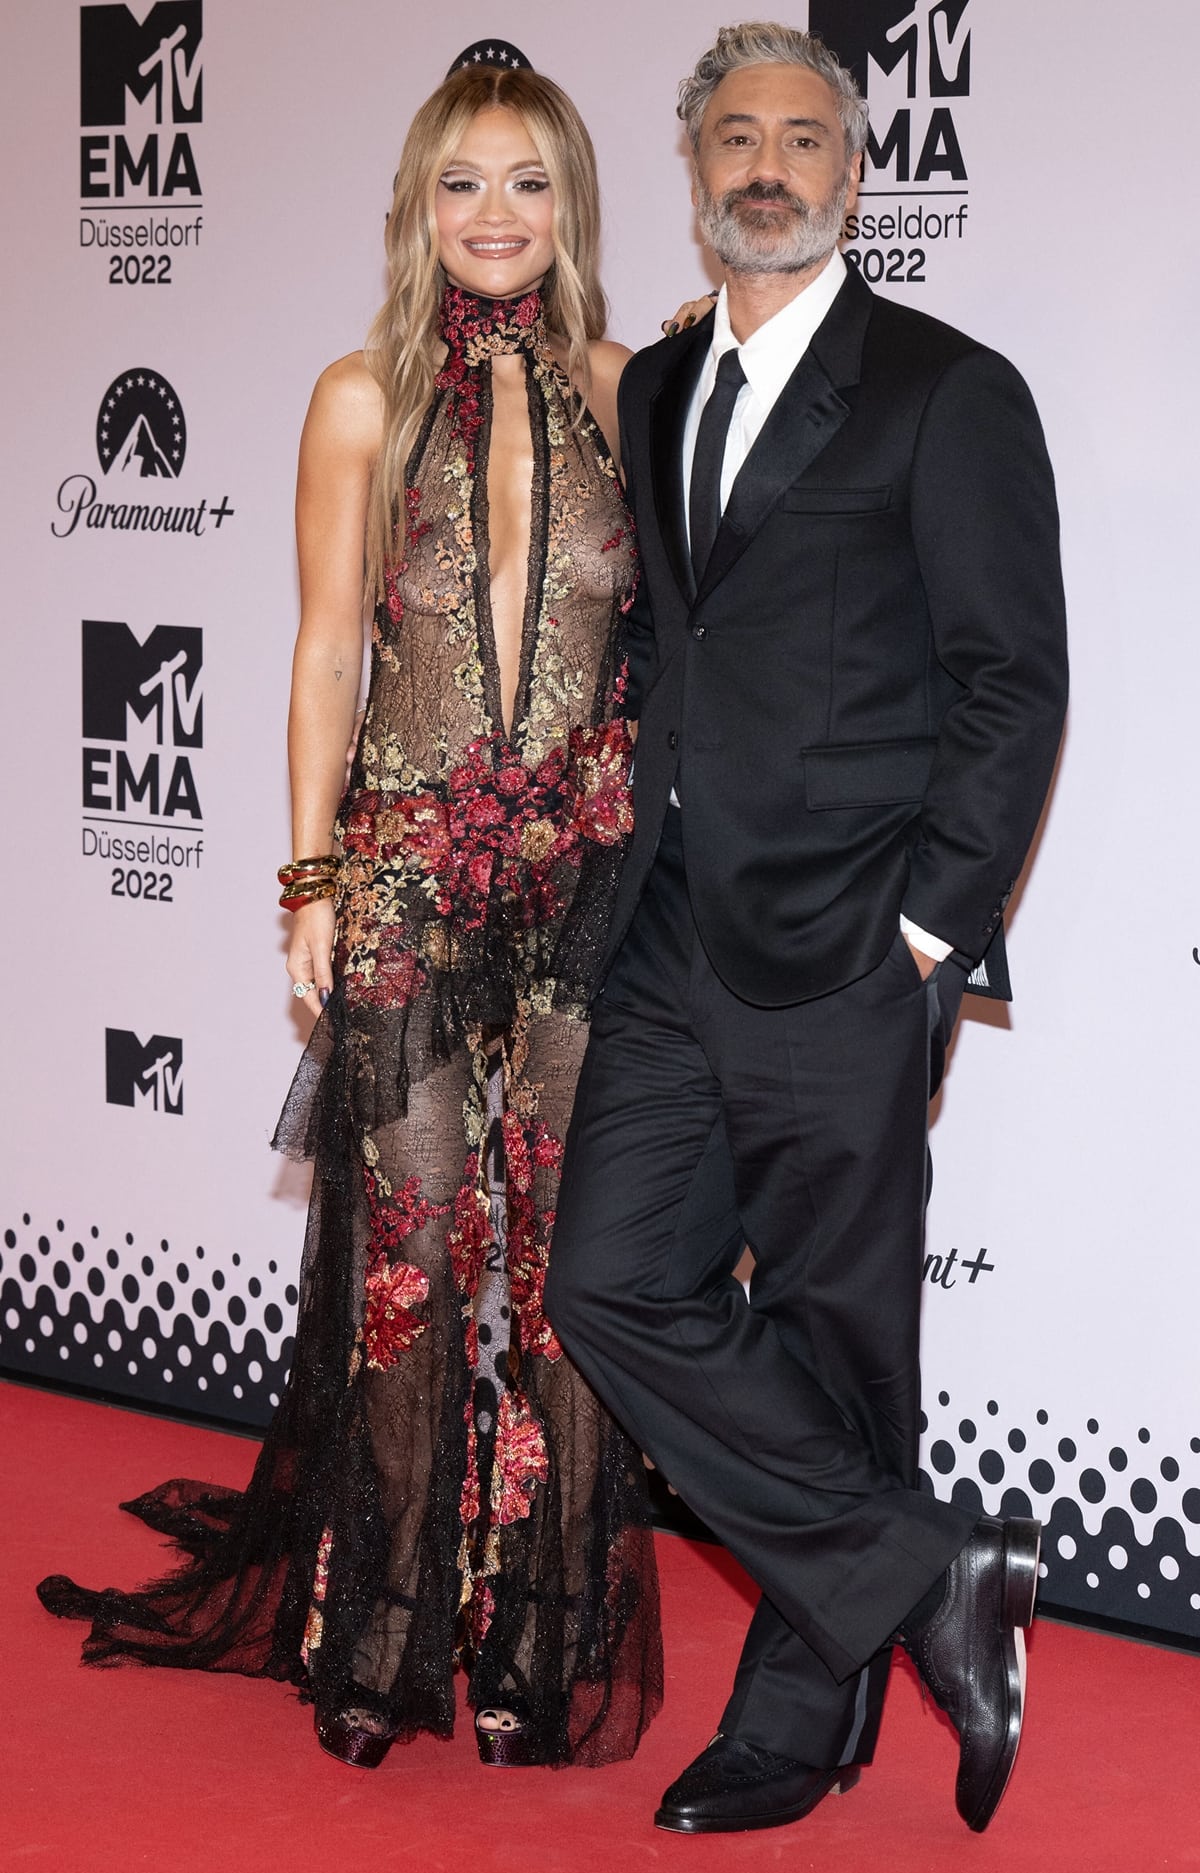 Rita Ora and her husband Taika Waititi attend the red carpet during the MTV Europe Music Awards 2022